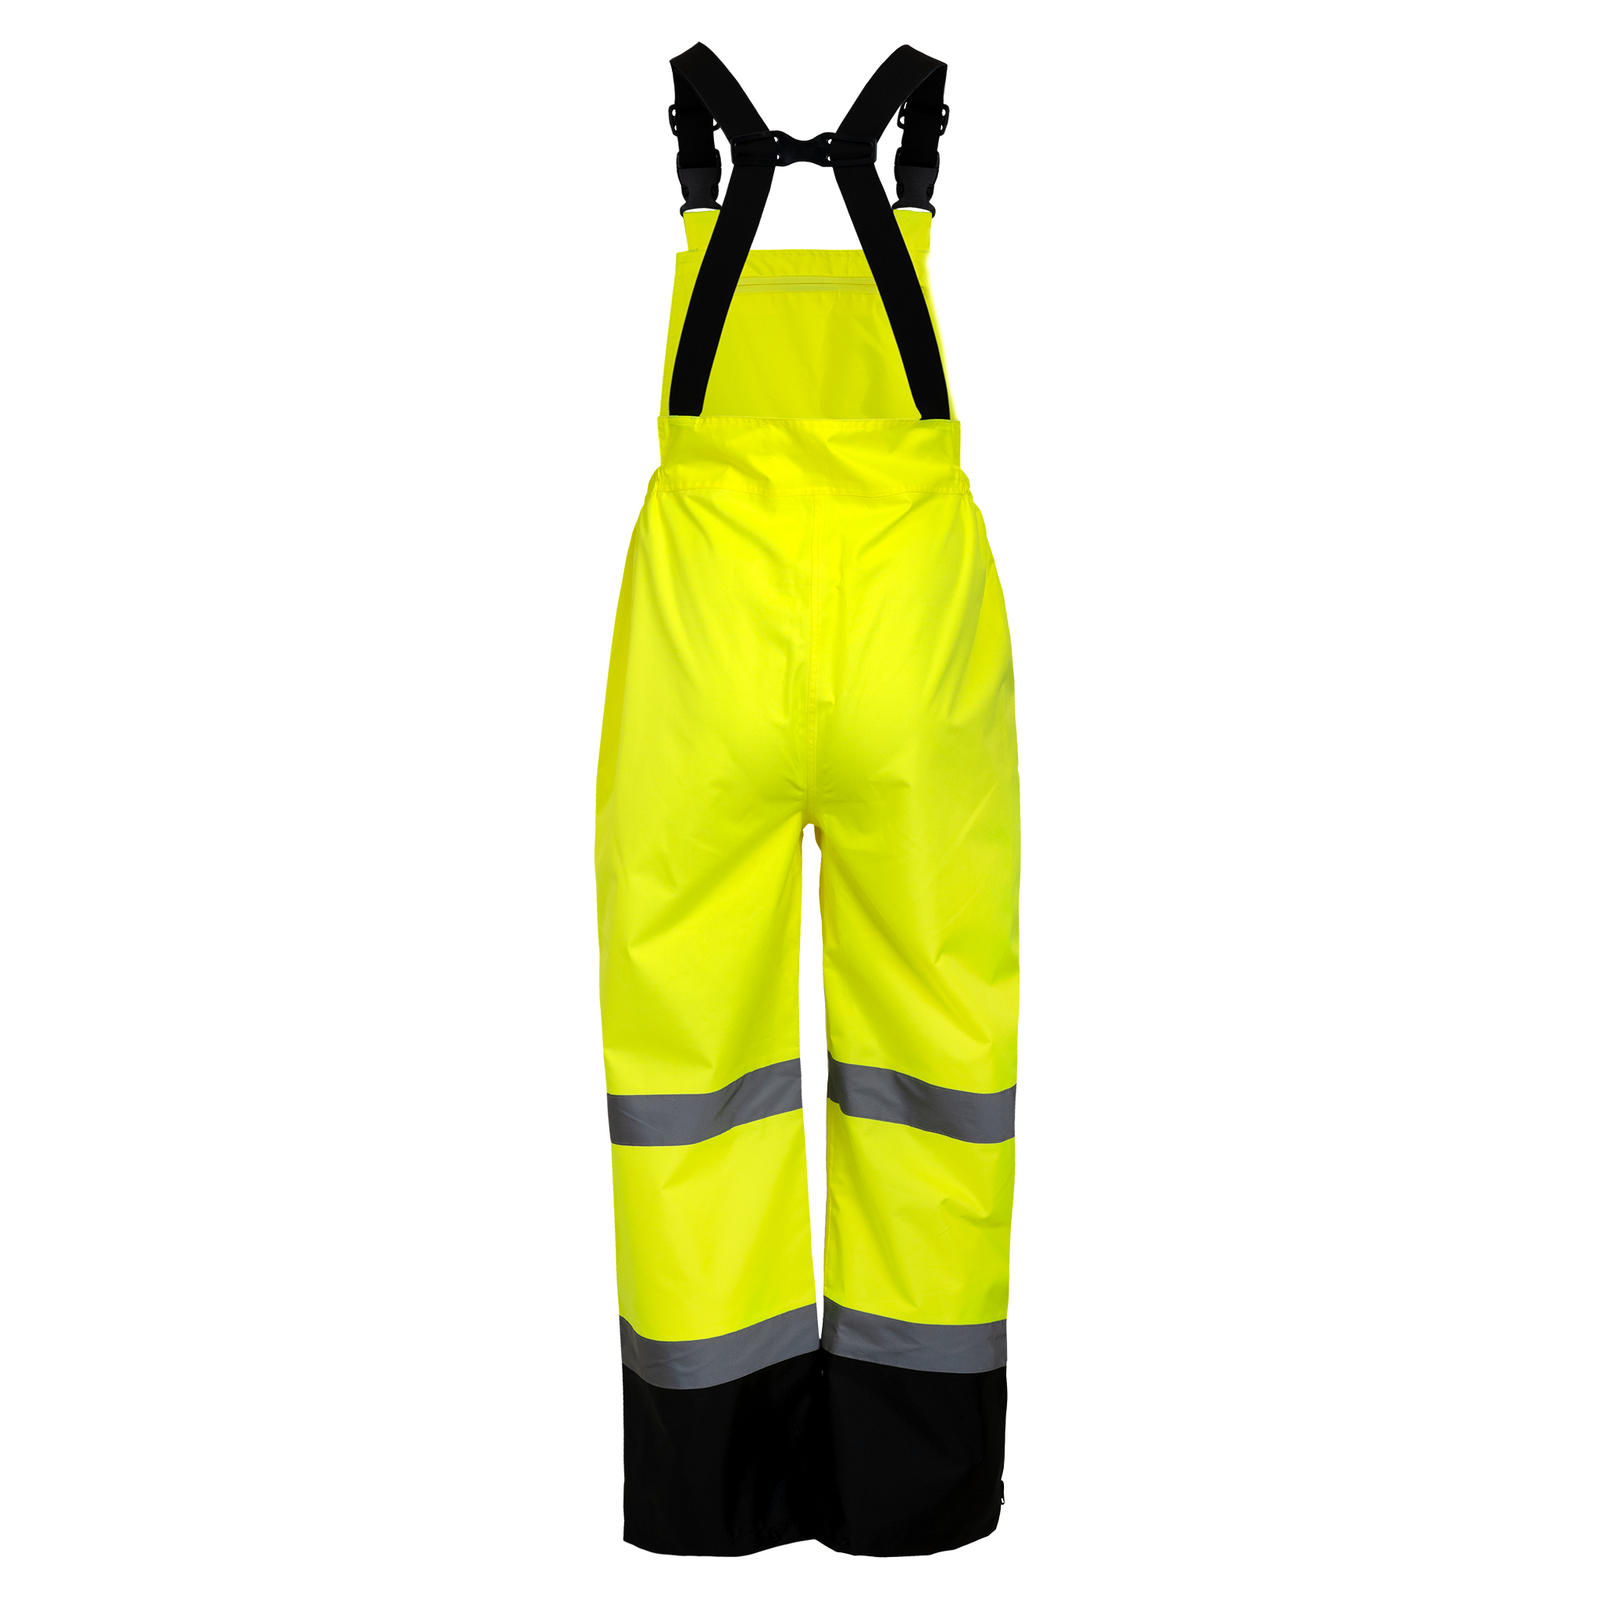 Yellow safety overall pants with adjustable straps and reflective stripes class E type 2